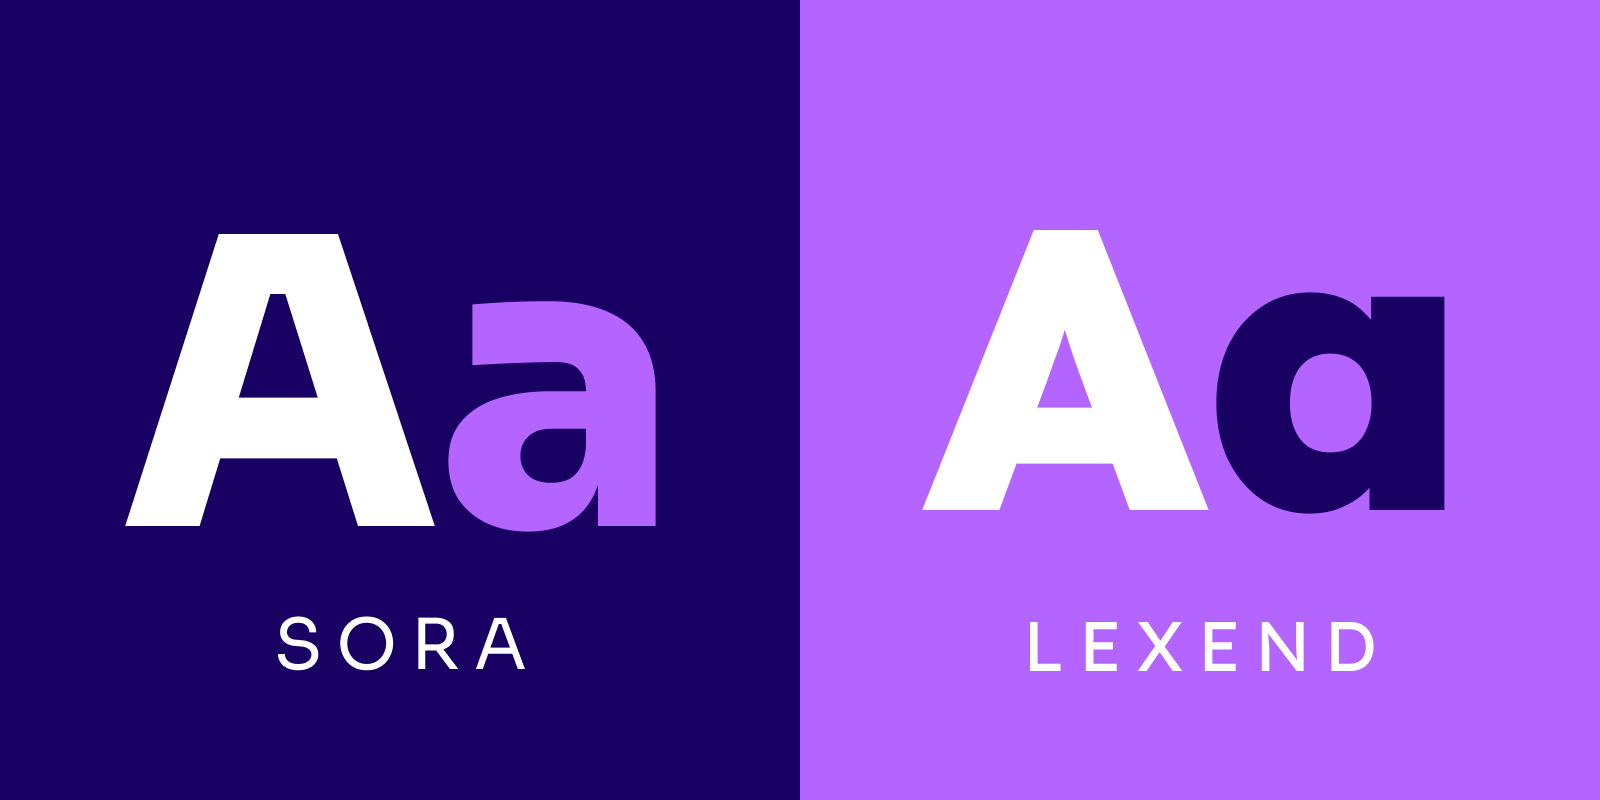 More iterations of the new typography and color choices